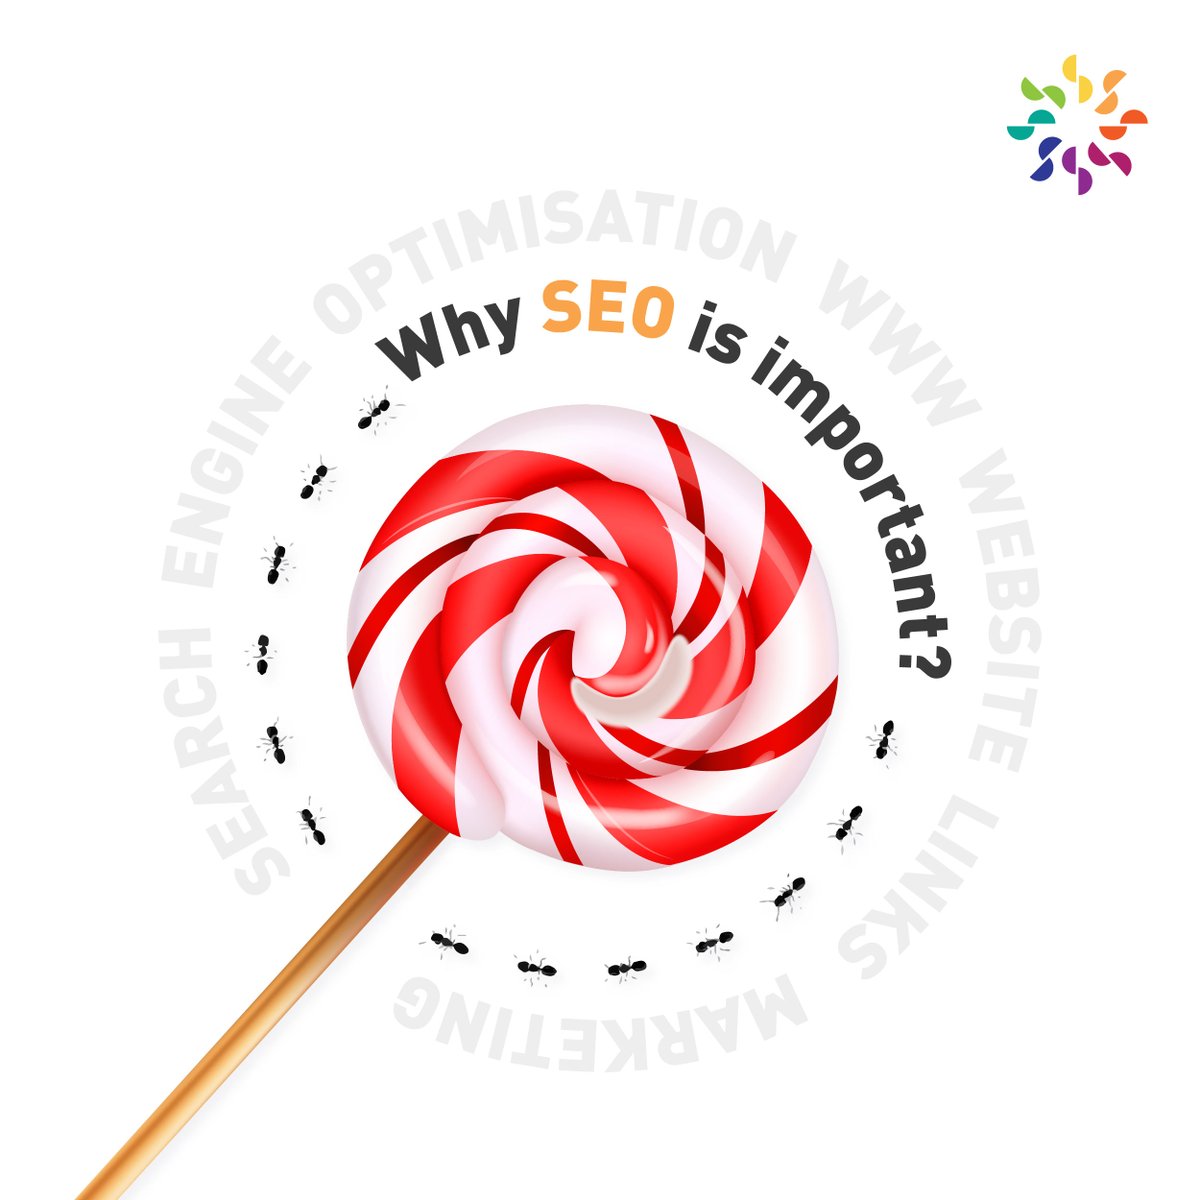 Unlock the power of SEO with our advertising agency! Elevate your online presence and reach new heights in search rankings. Let's boost your visibility and drive more traffic to your website.
#SEO #DigitalMarketing #AdvertisingAgency #SEOtips #SearchEngineOptimization #SEOhacks